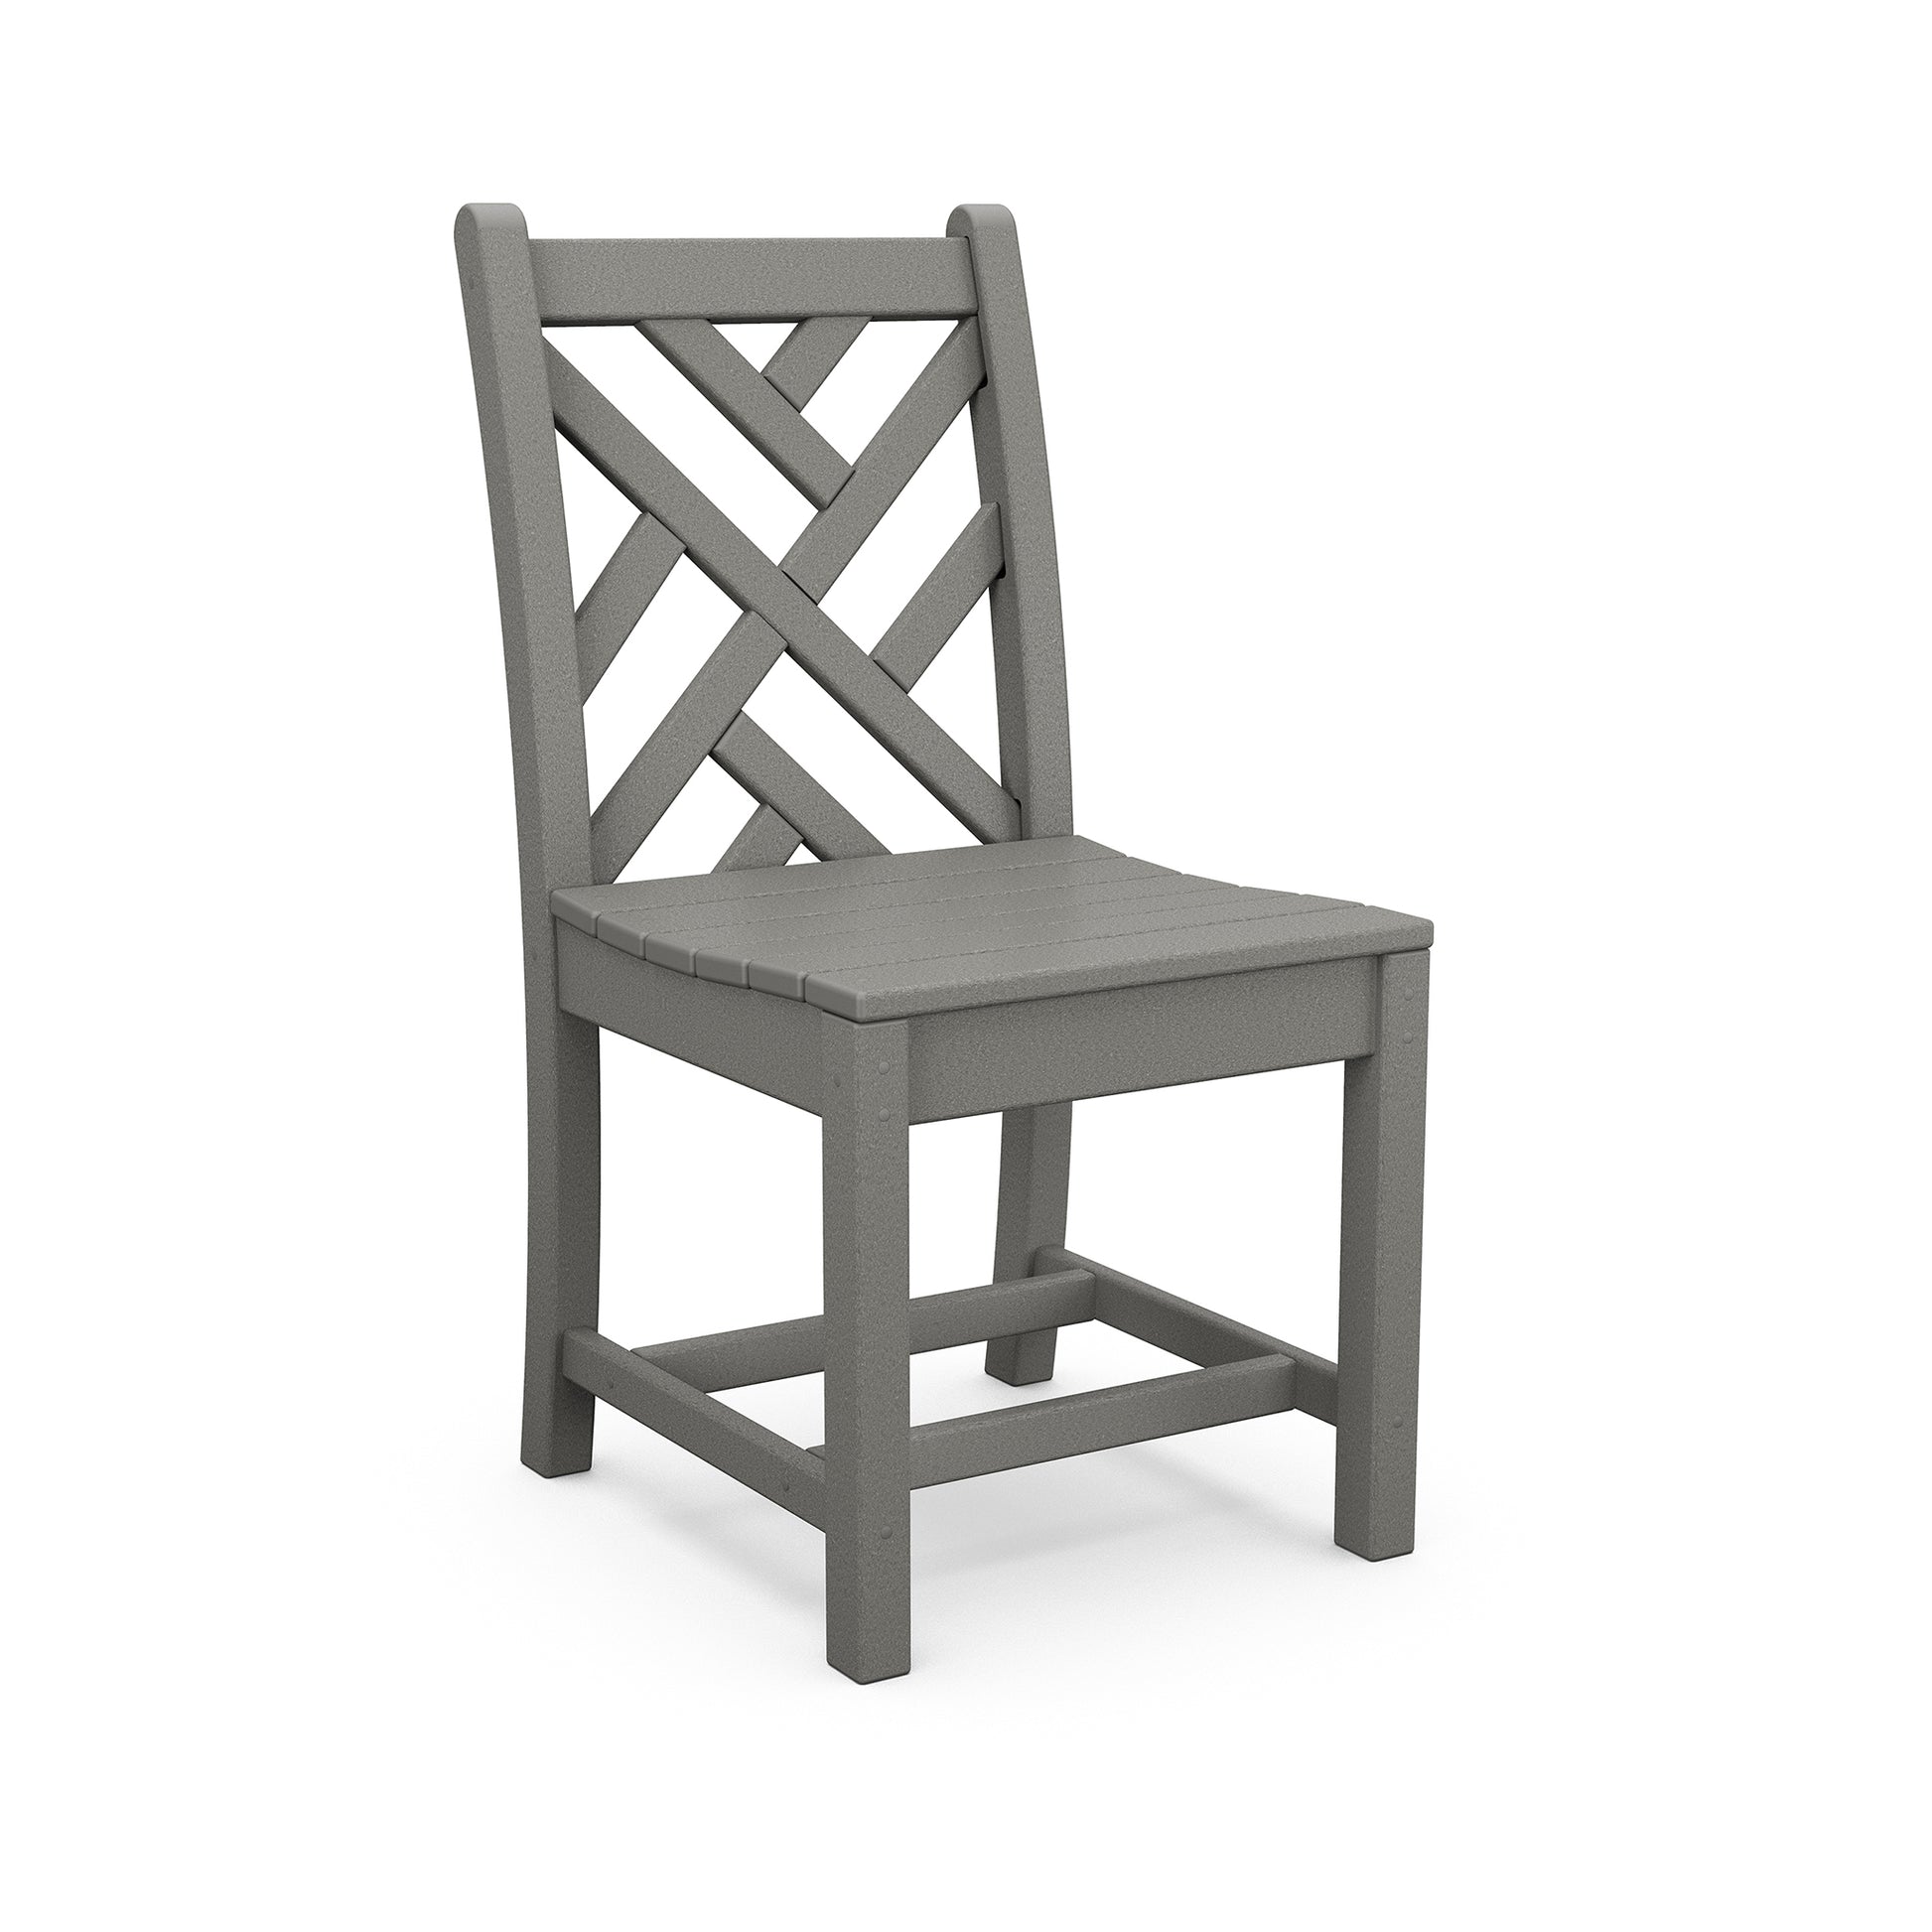 A gray POLYWOOD Chippendale Outdoor Dining Side Chair with a crisscross backrest design and square seat, displayed on a white background.